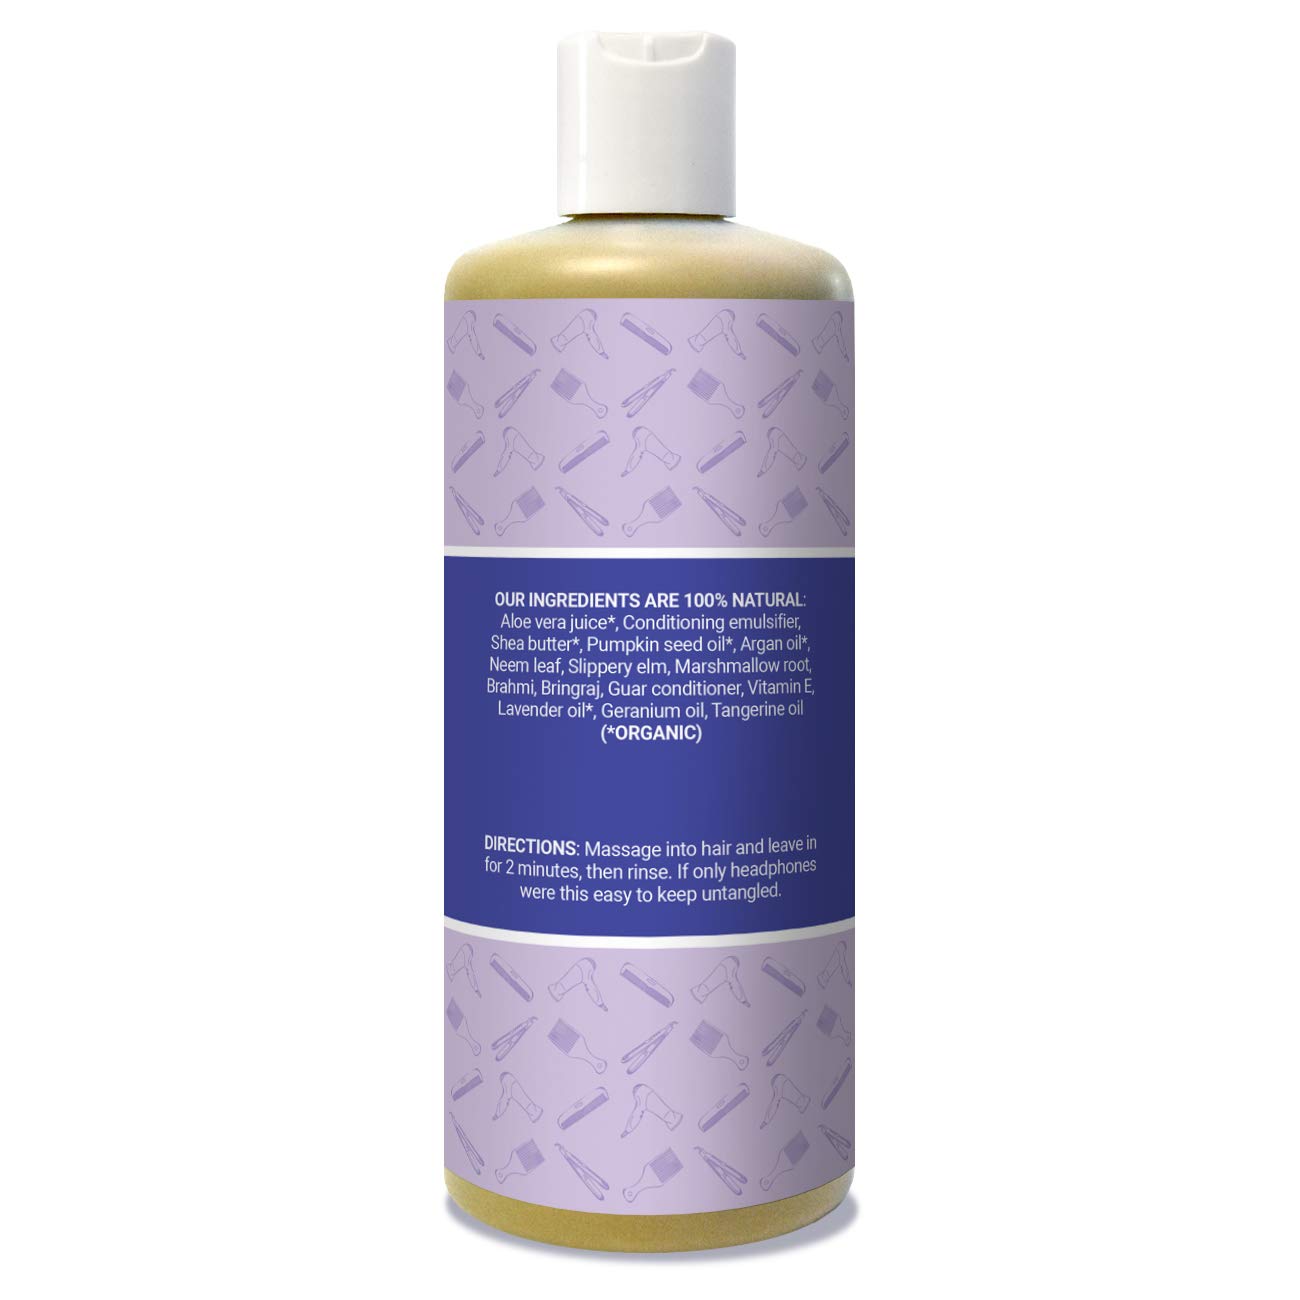 Jivi Conditioner With Argan Oil (Lavender) | Makes Hair Softer, Shinier, and More Manageable | 100% Natural with Organic Ingredients | Made for All Hair Types, Color Safe | 14 fl. oz.